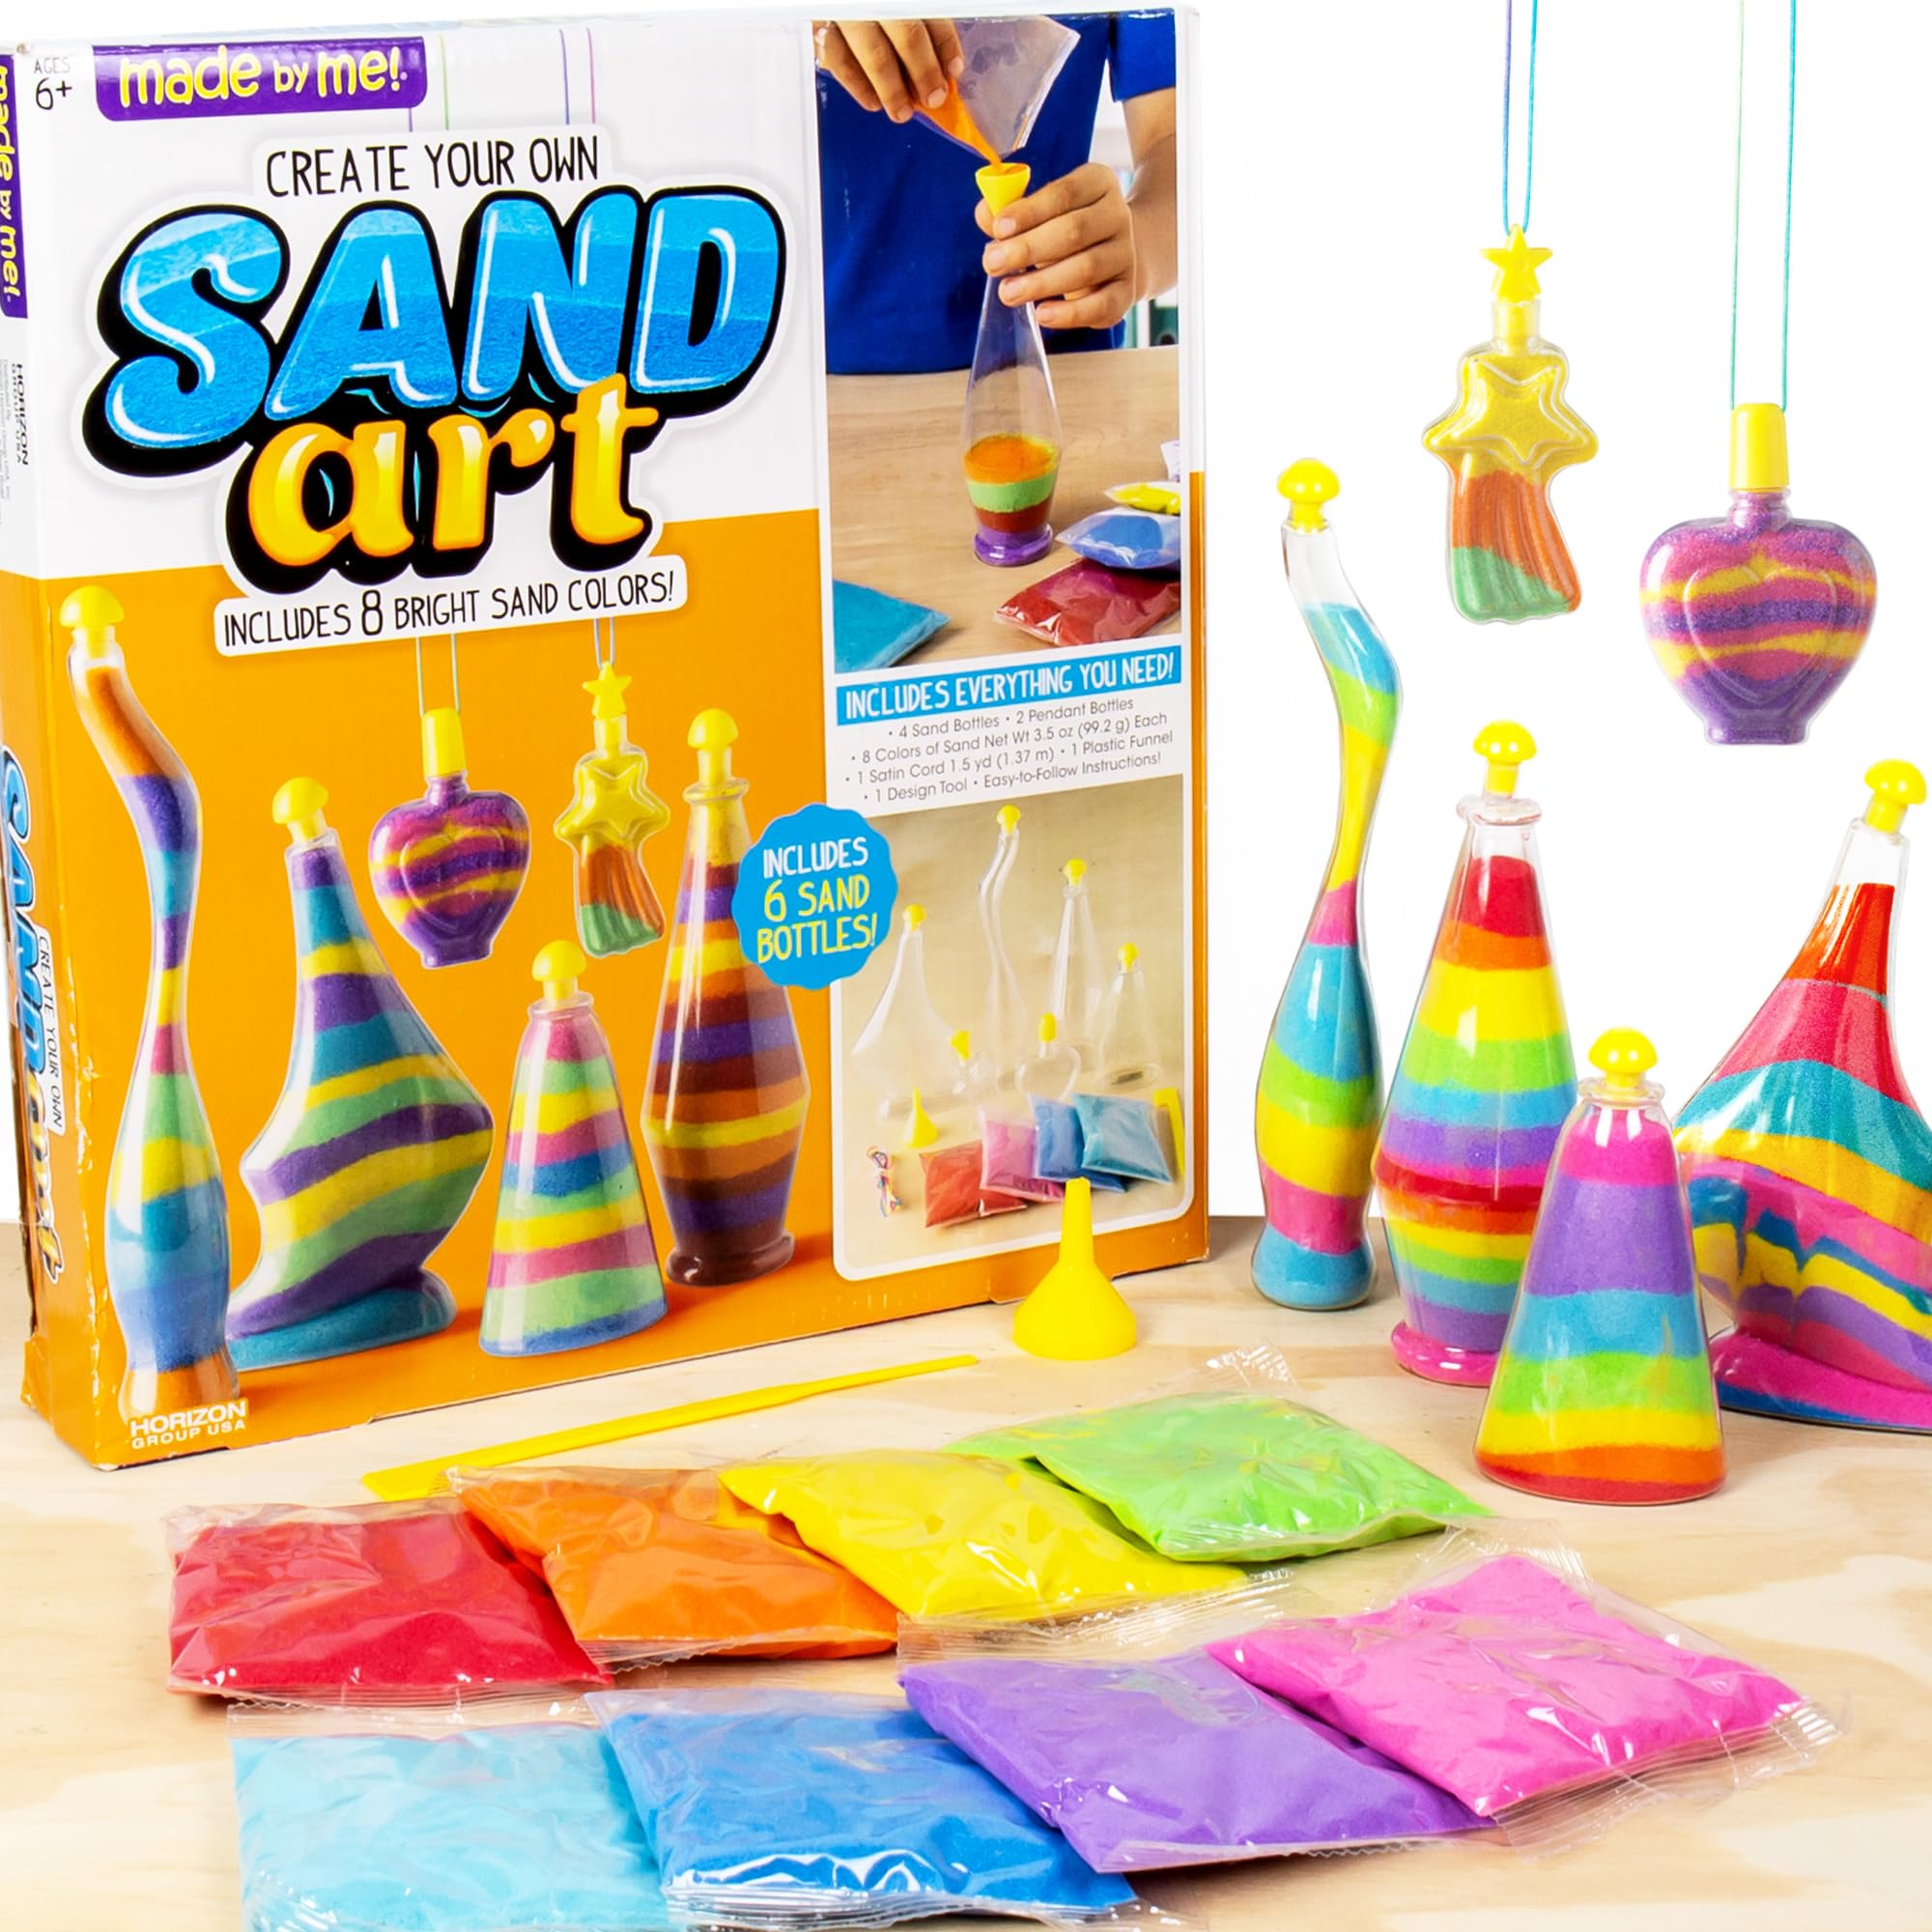 Made By Me Create Your Own Sand Art by Horizon Group Usa, DIY Kit Includes 4 Sand Bottles & 2 Pendent Bottles with 8 Bright Colors, Designing Tool & More. Multicolored